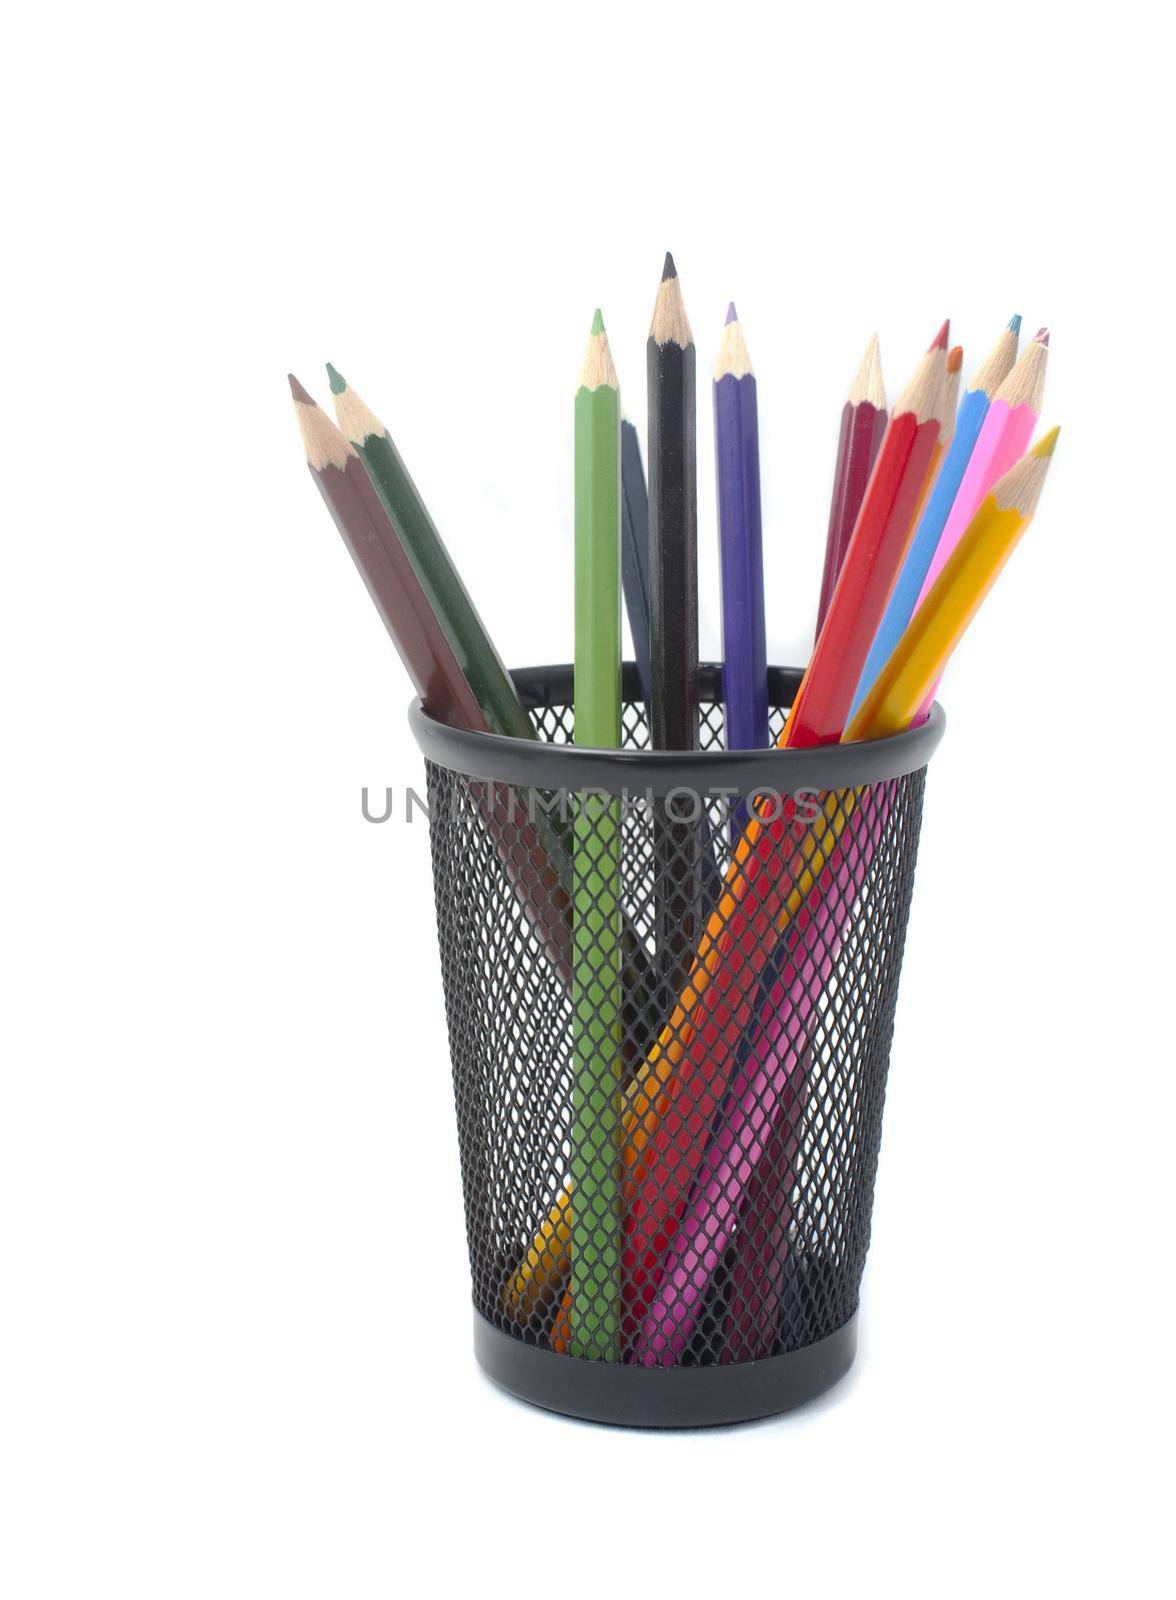 Coloured pencils in a basket by sanisra